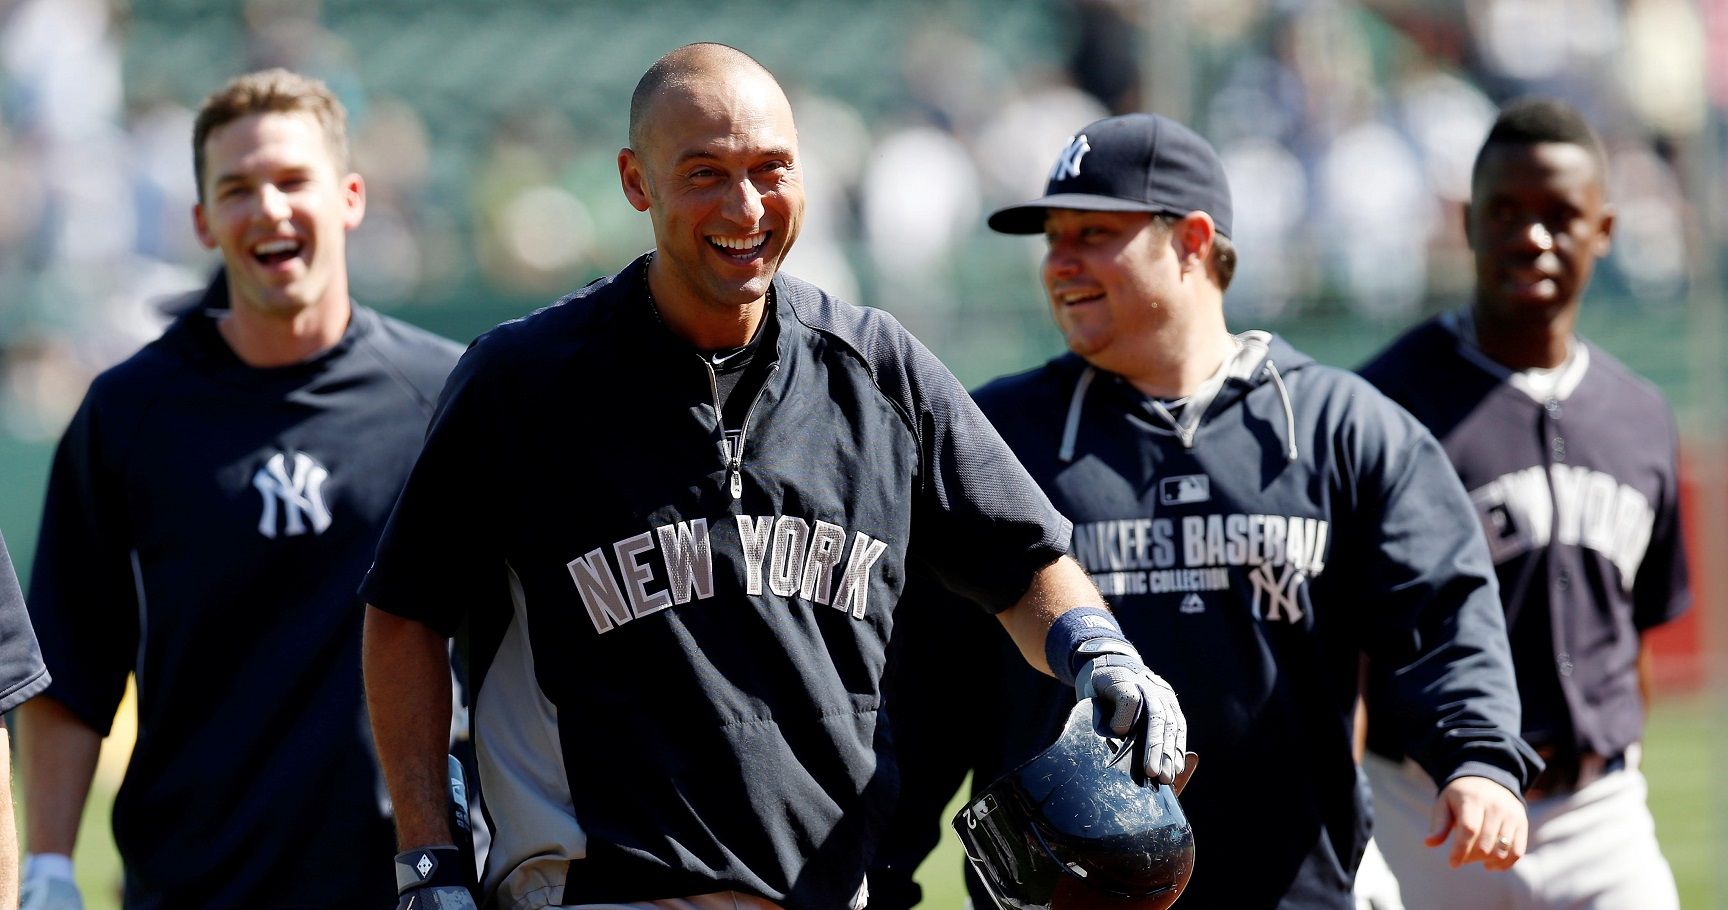 The 10 Highest MLB Payrolls of Teams That Didn't Make the 2014 Playoffs